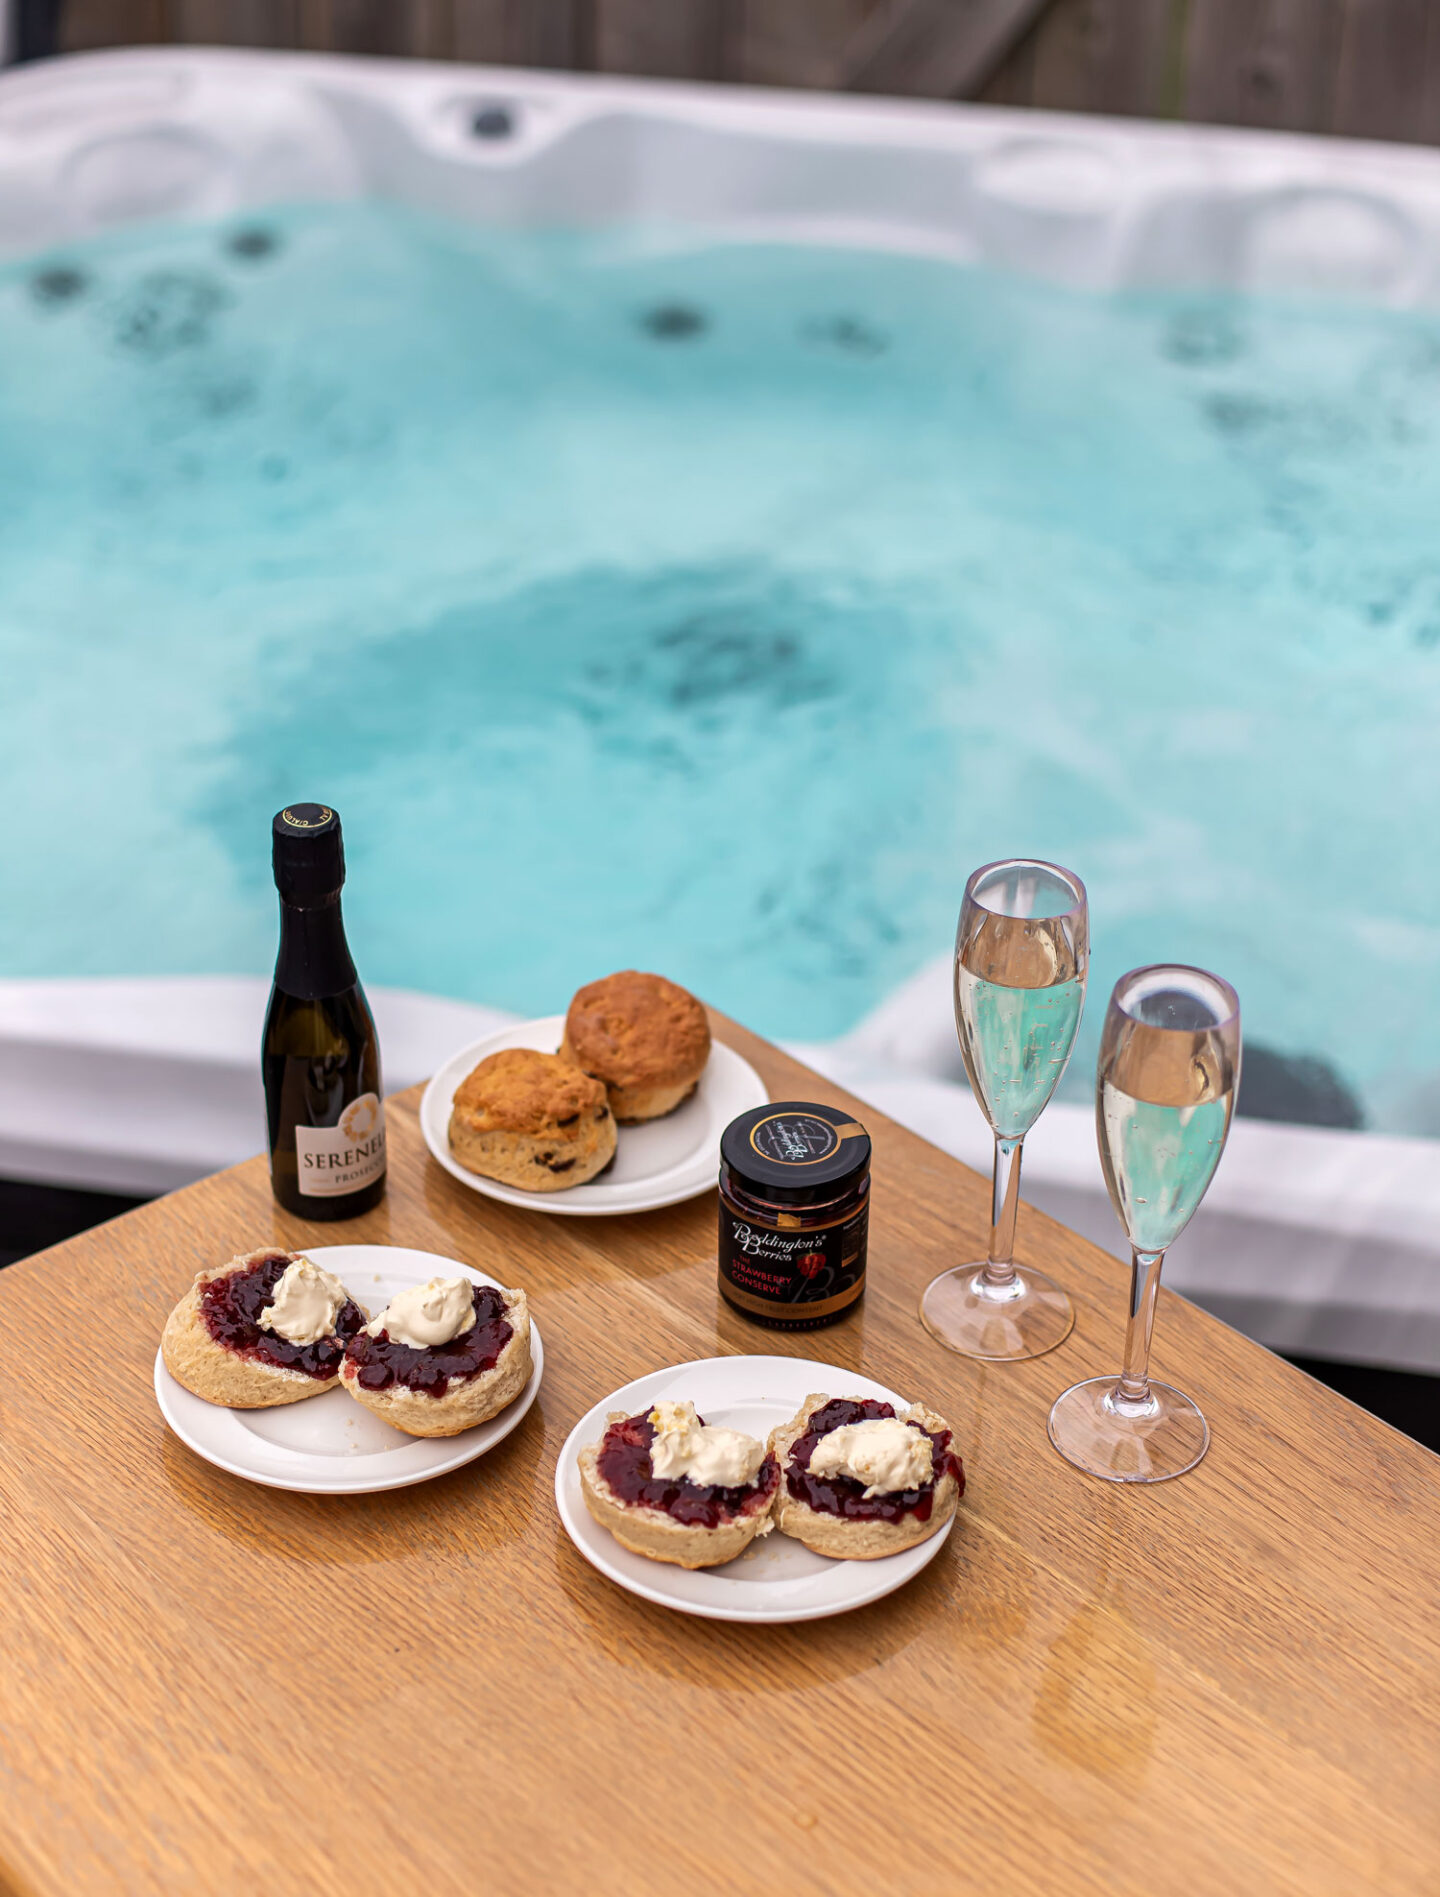 A delightful setup of afternoon tea is placed on a wooden table beside a bubbling hot tub. The table features plates of scones topped with clotted cream and jam, a jar of strawberry jam, a bottle of Prosecco, and two filled champagne flutes. In the background, the inviting turquoise water of the hot tub creates a serene and relaxing atmosphere.